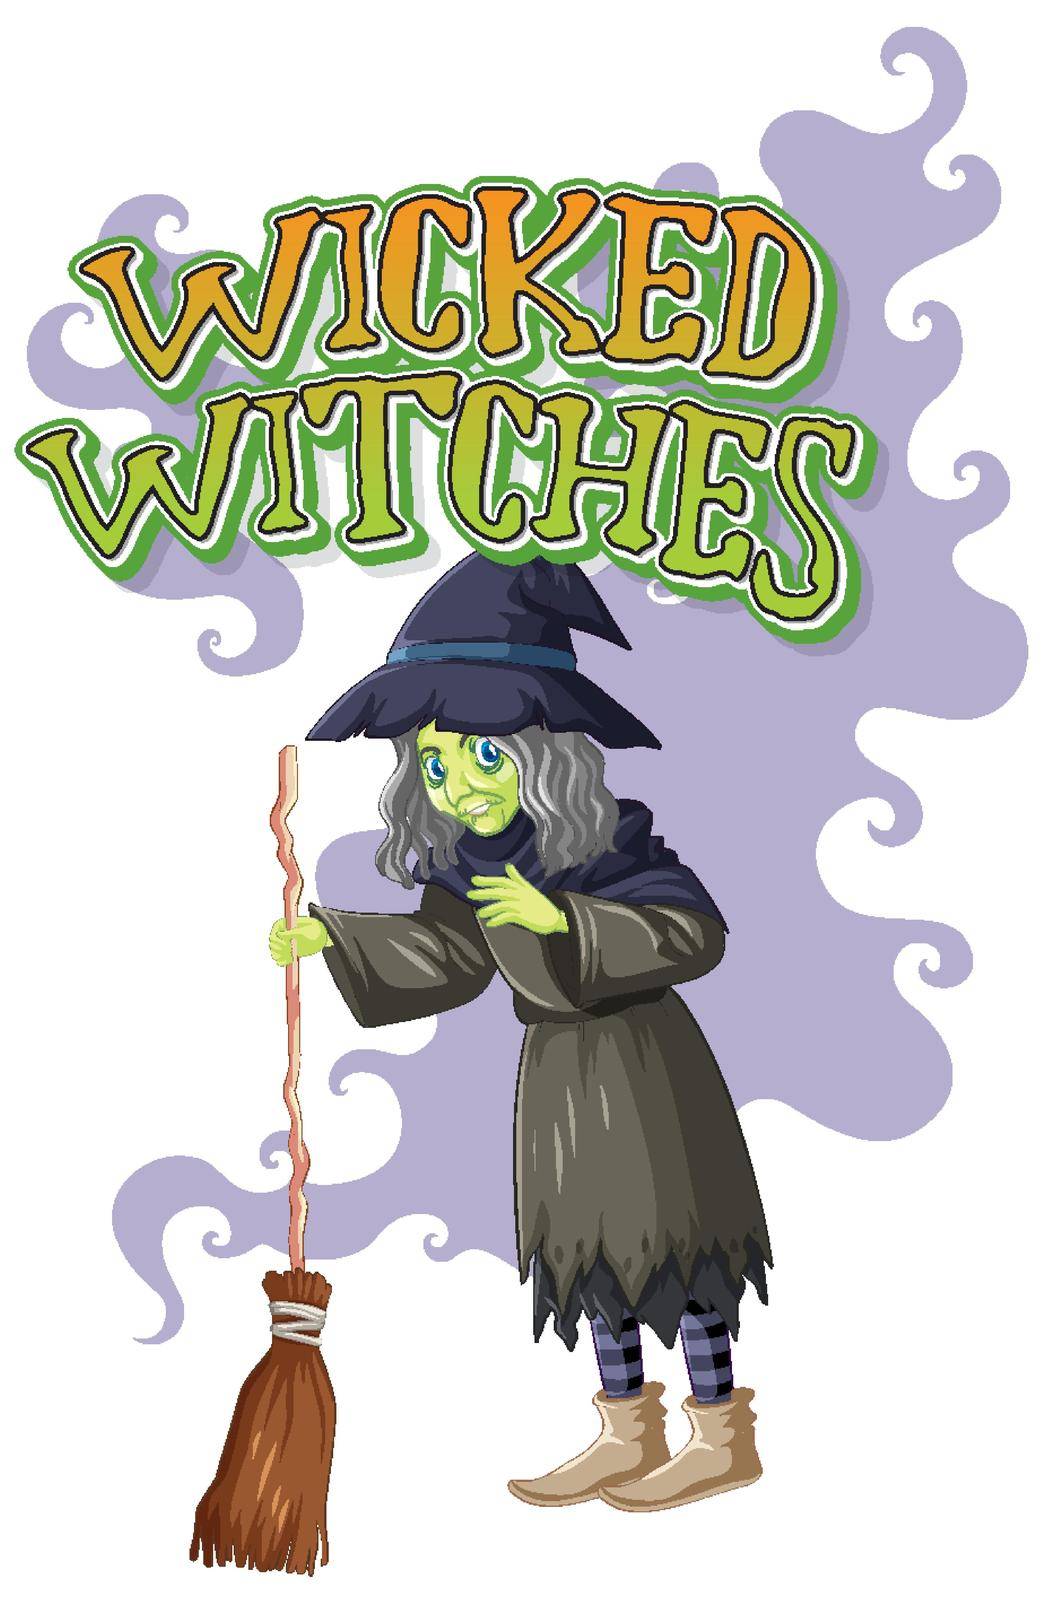 Wicked witches holding broom by iimages